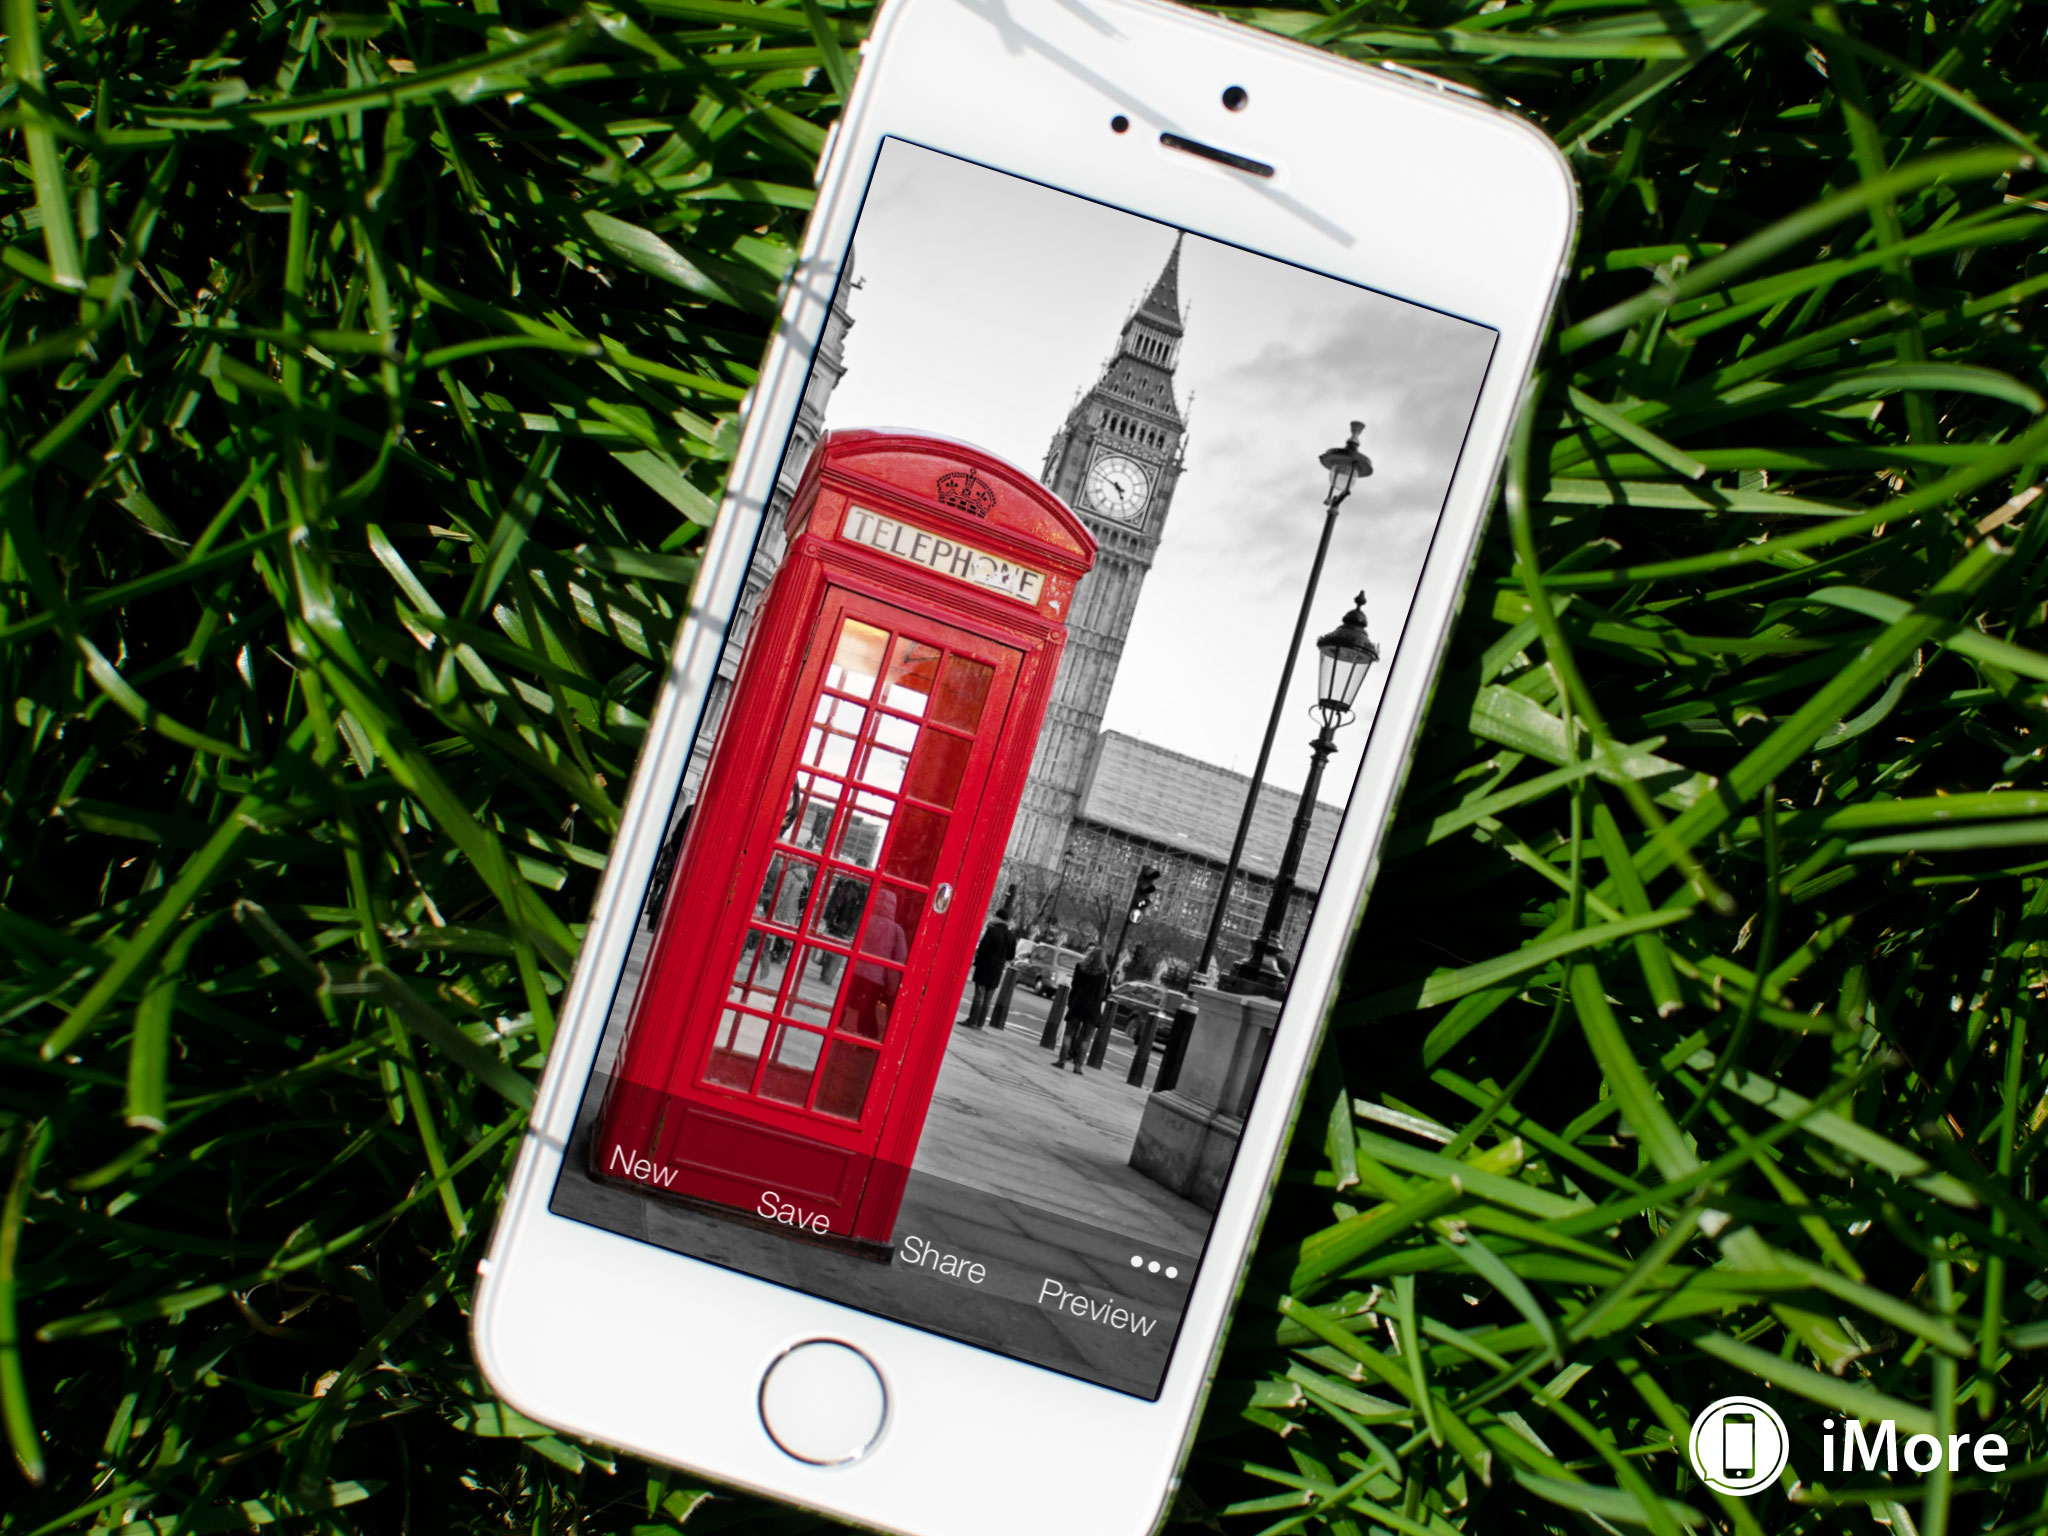 Wallpaper Fix gives you another way to make backgrounds in iOS 7 behave